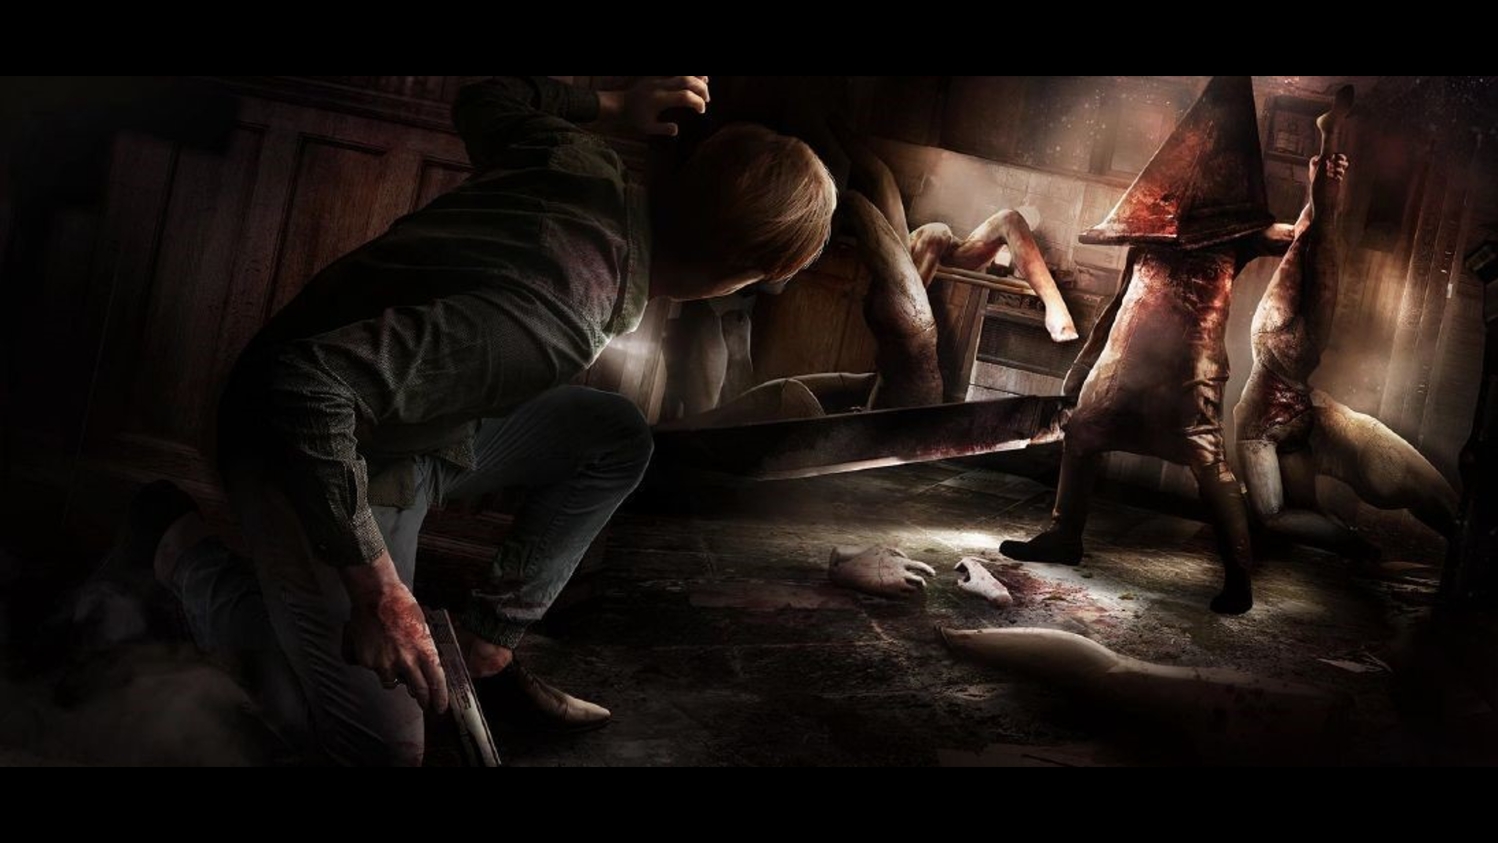 Silent Hill 2 Remake Has 'Seamless' Gameplay With No Loading Screens - IGN